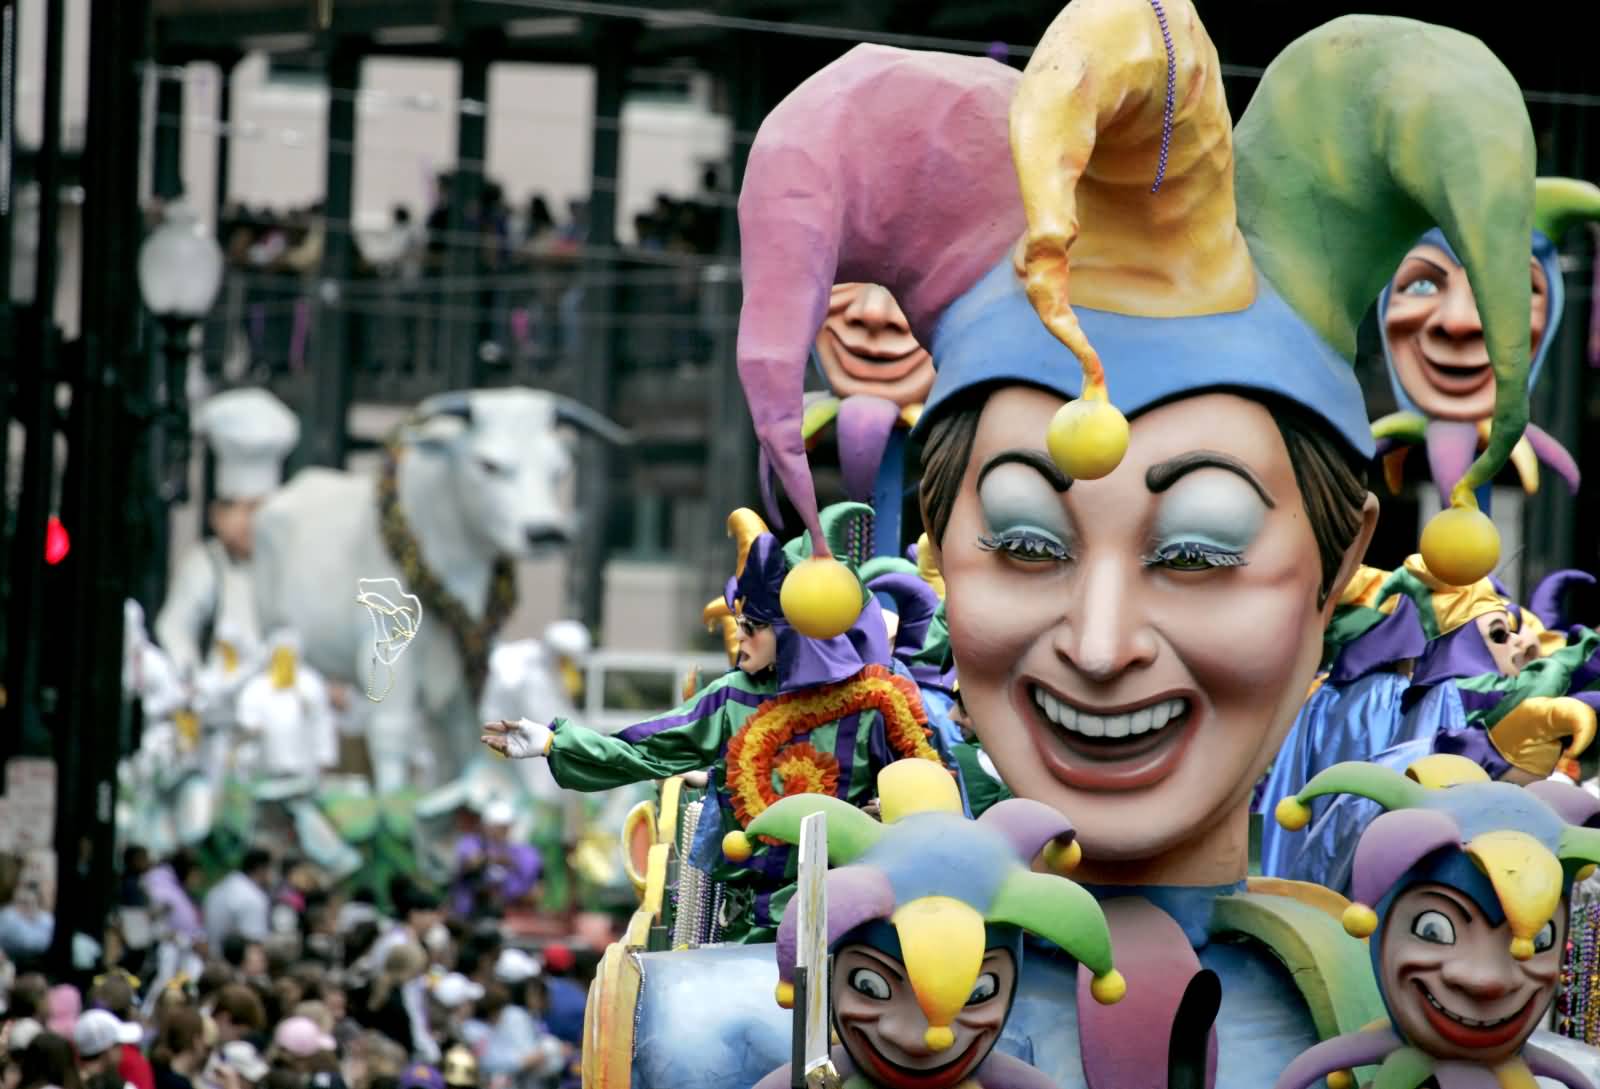 Adorable Jester Float In Mardi Gras Parade